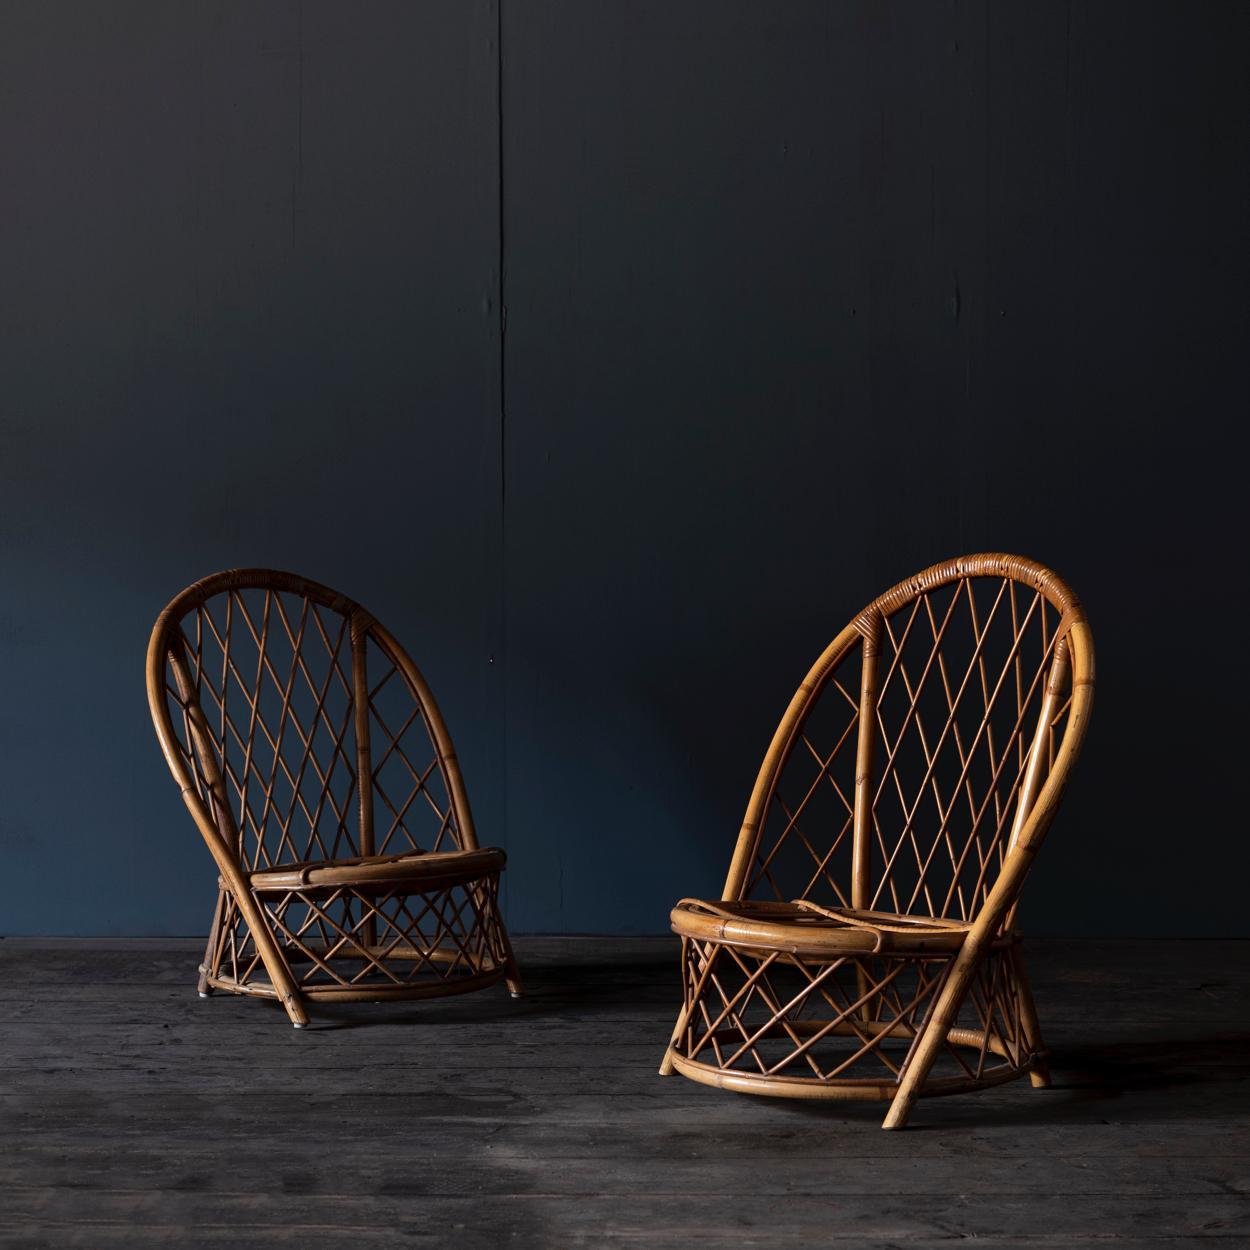 French Set of Two Rattan Low Chairs and a Magazine Rack, Audoux Minet, 1960s, France